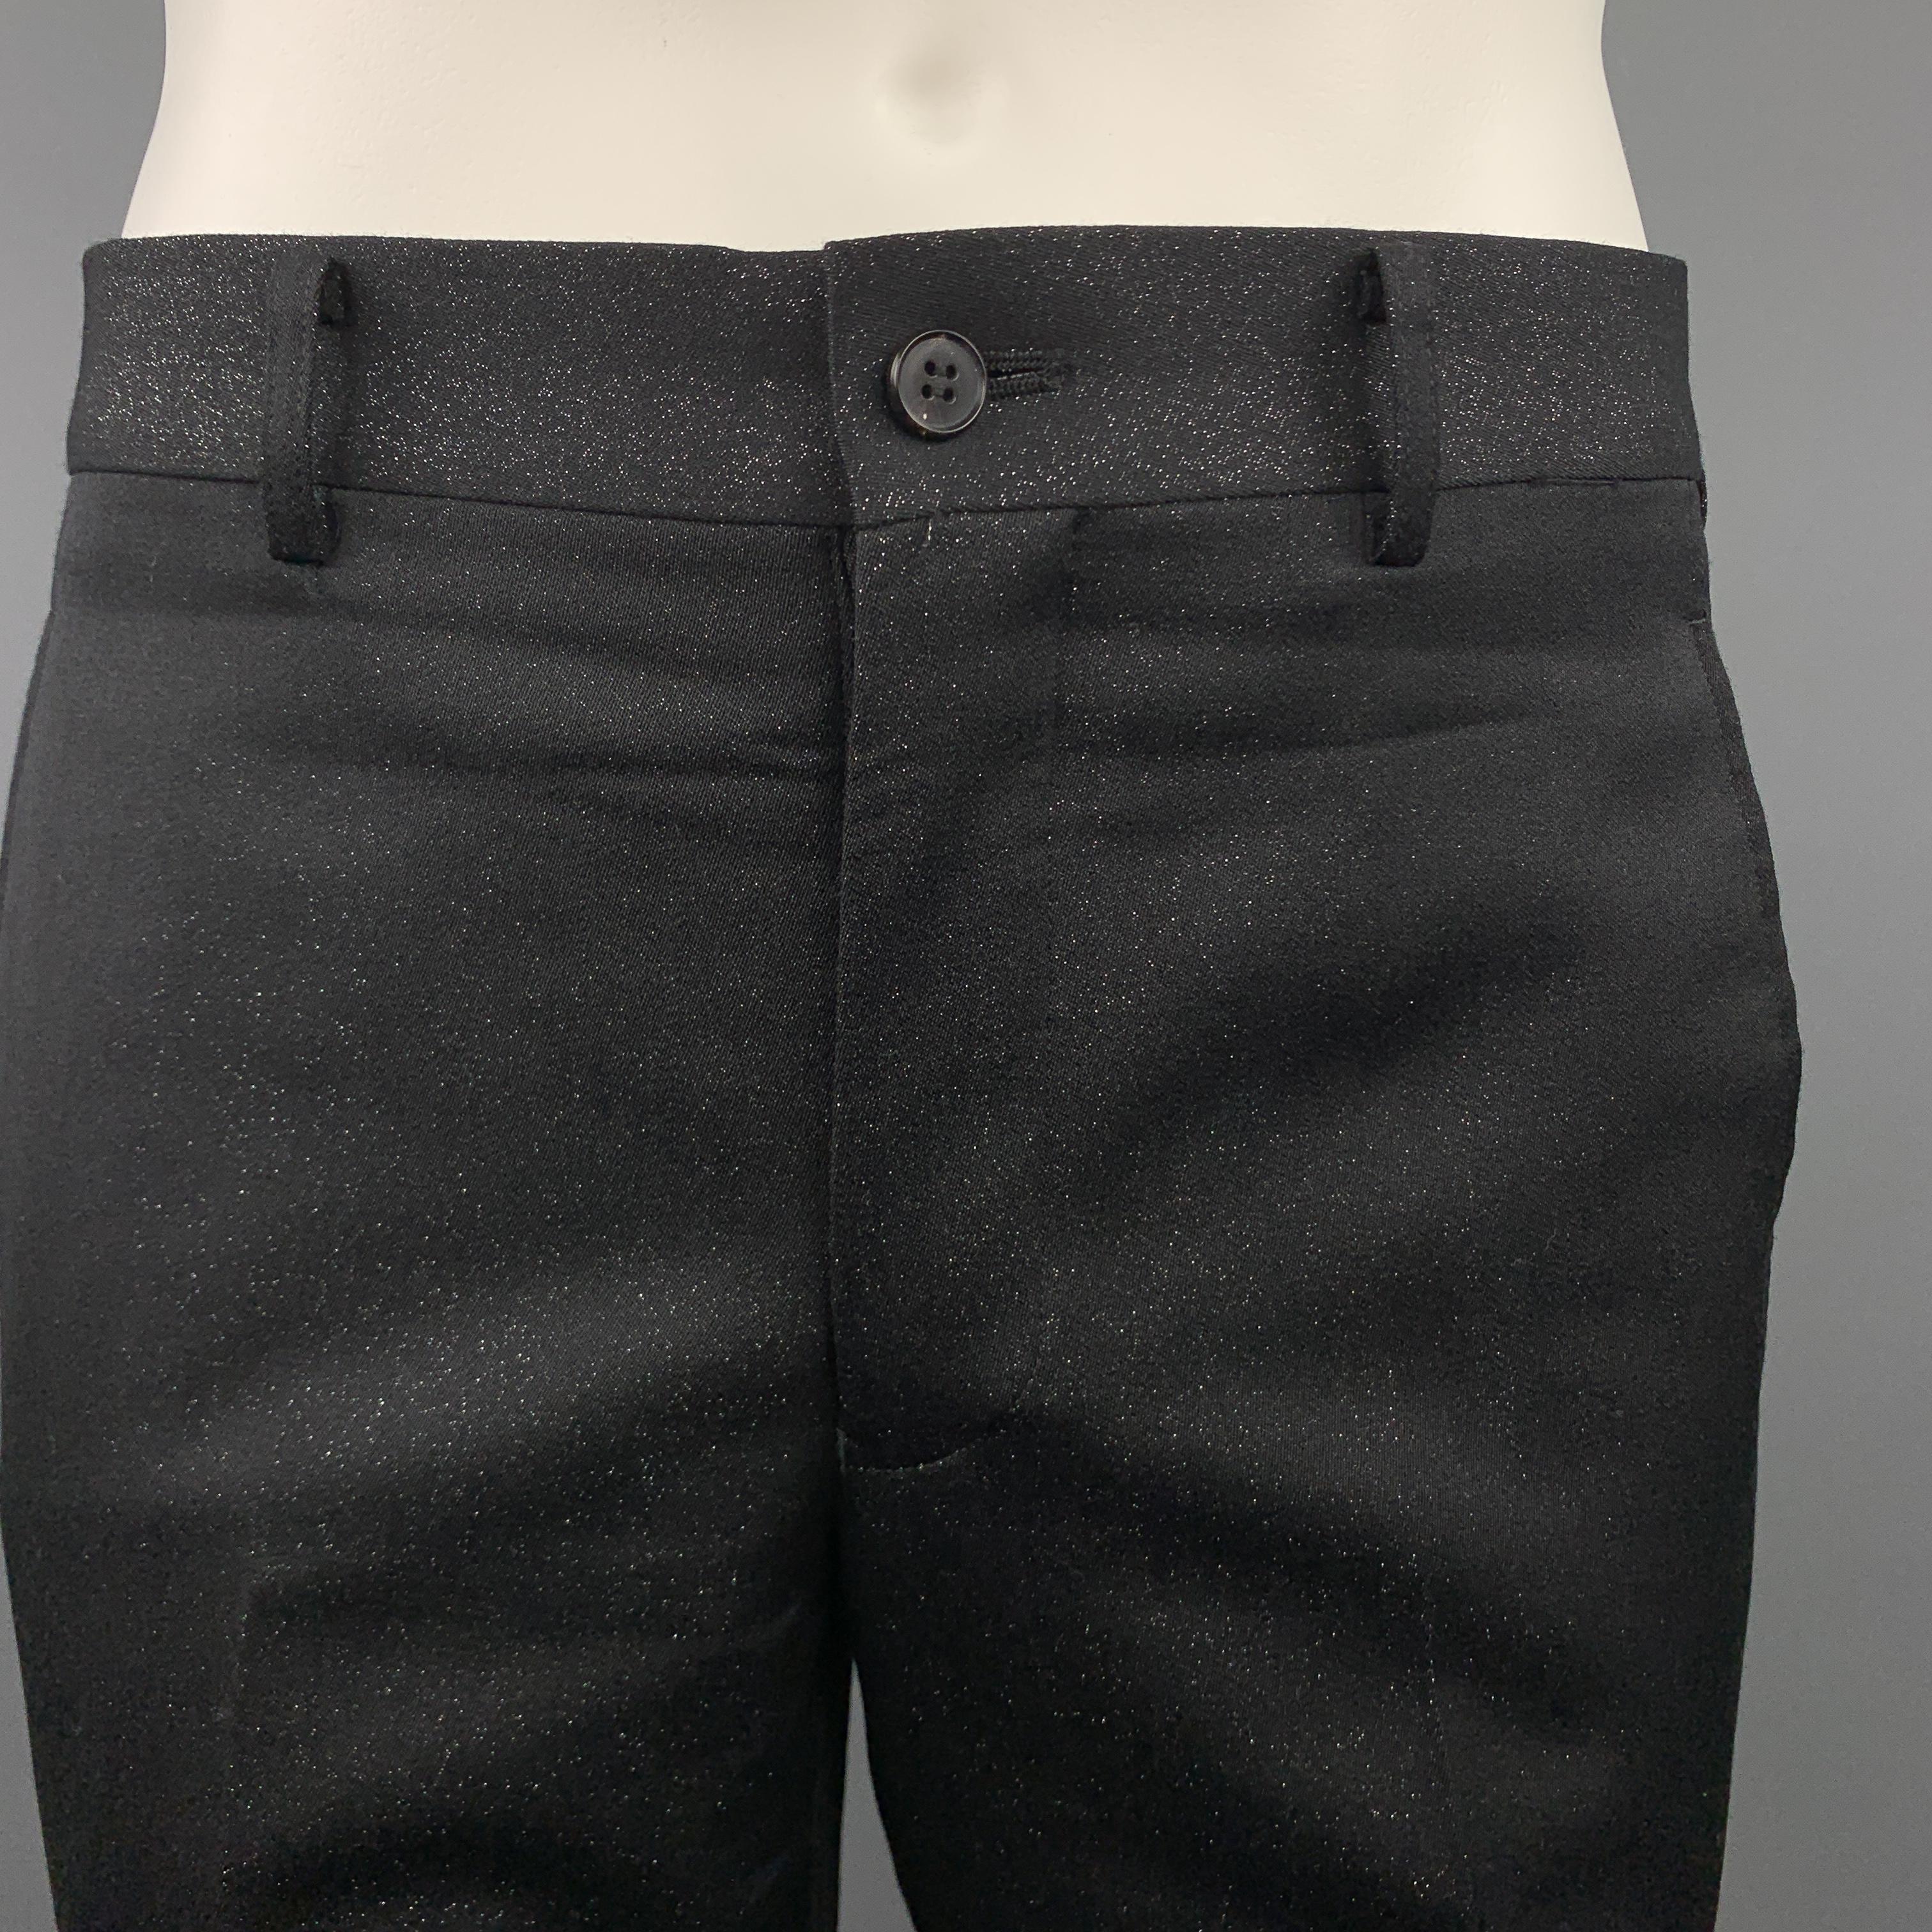 COMME des GARCONS HOMME PLUS dress pants come in black wool blend sparkle twill with a slim flat front leg. Made in Japan.

Excellent Pre-Owned Condition.
Marked: M  AD 2014

Measurements:

Waist: 34 in.
Rise: 9.75 in.
Inseam: 29 in.